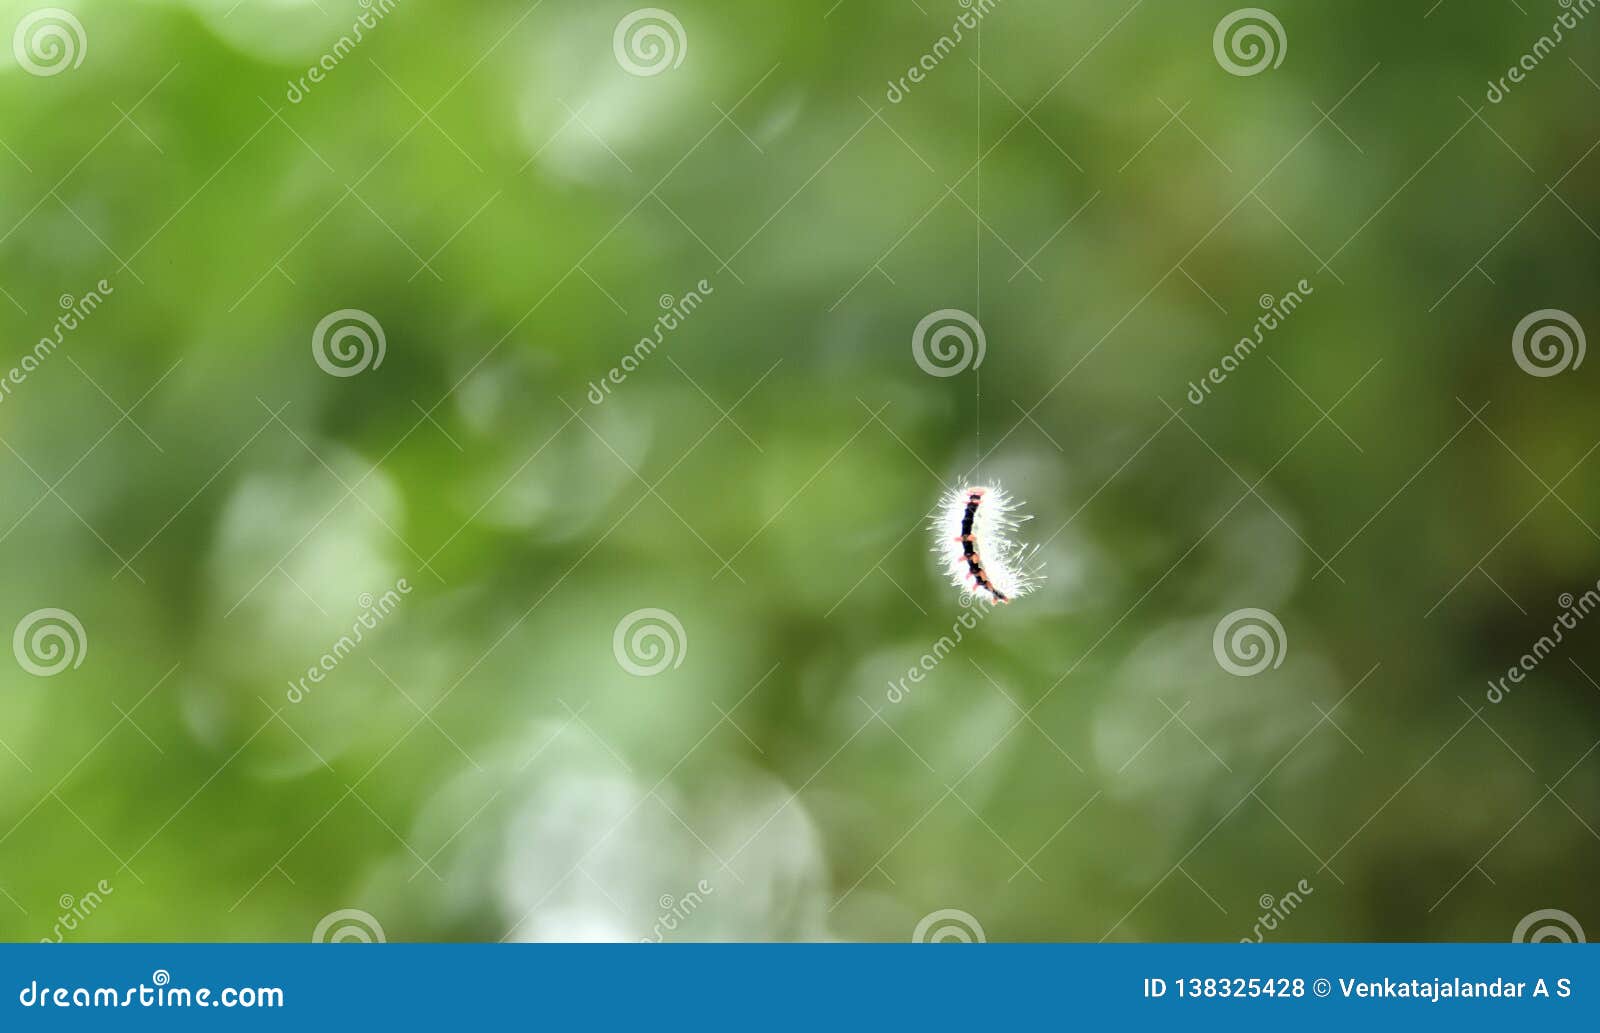 bungee-jumping caterpillar dropping down from tree